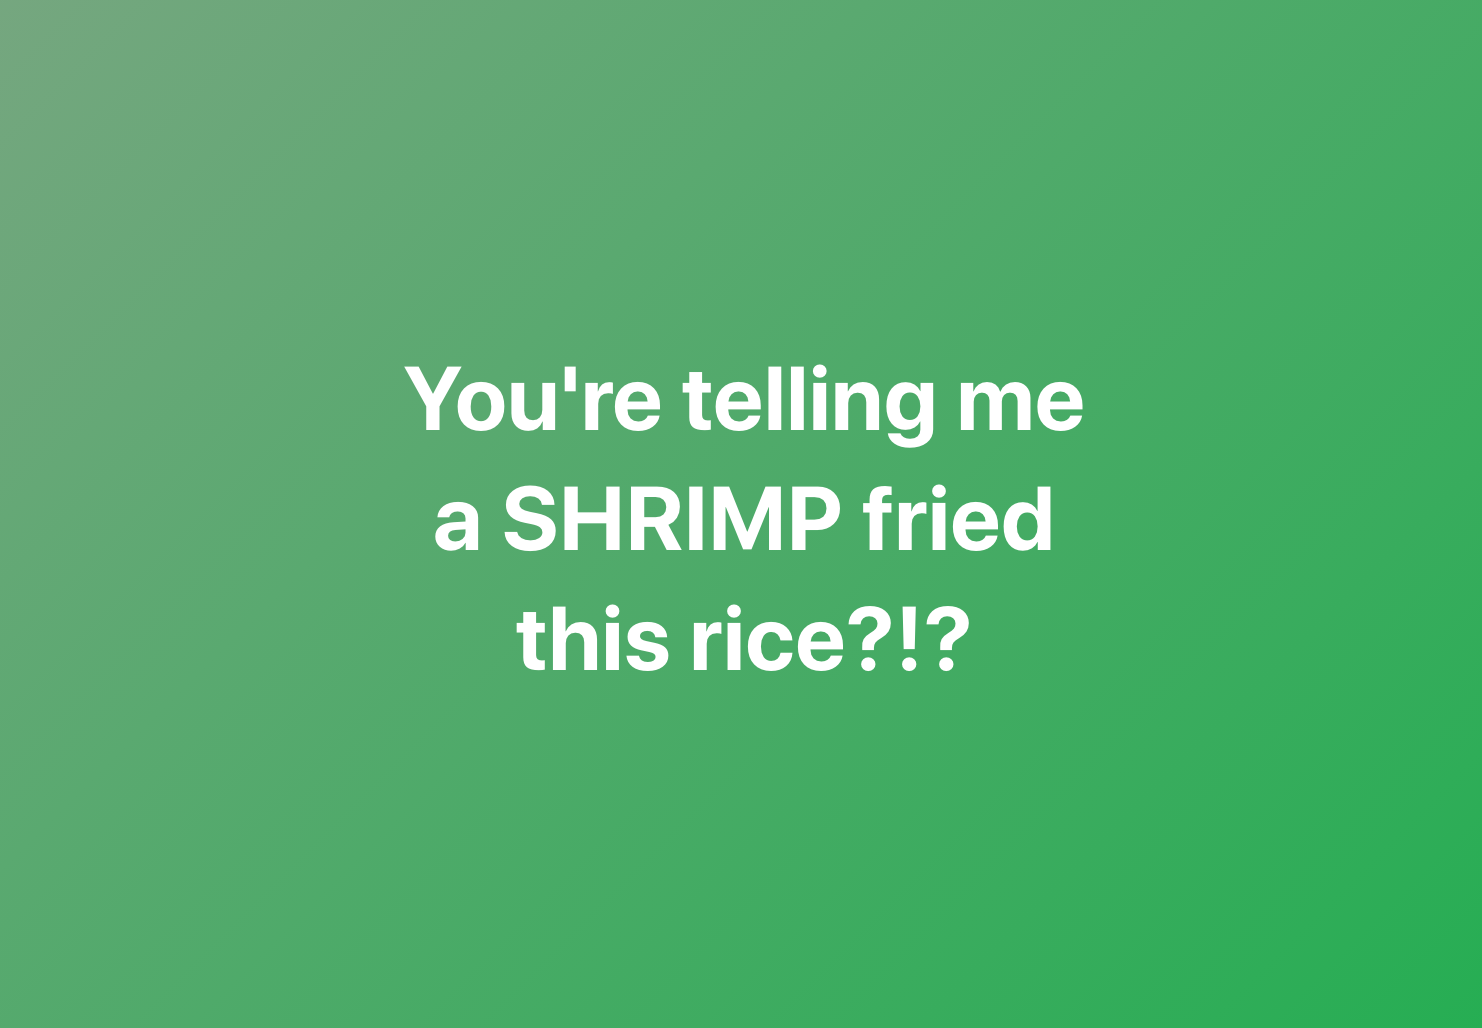 graphics - You're telling me a Shrimp fried this rice?!?